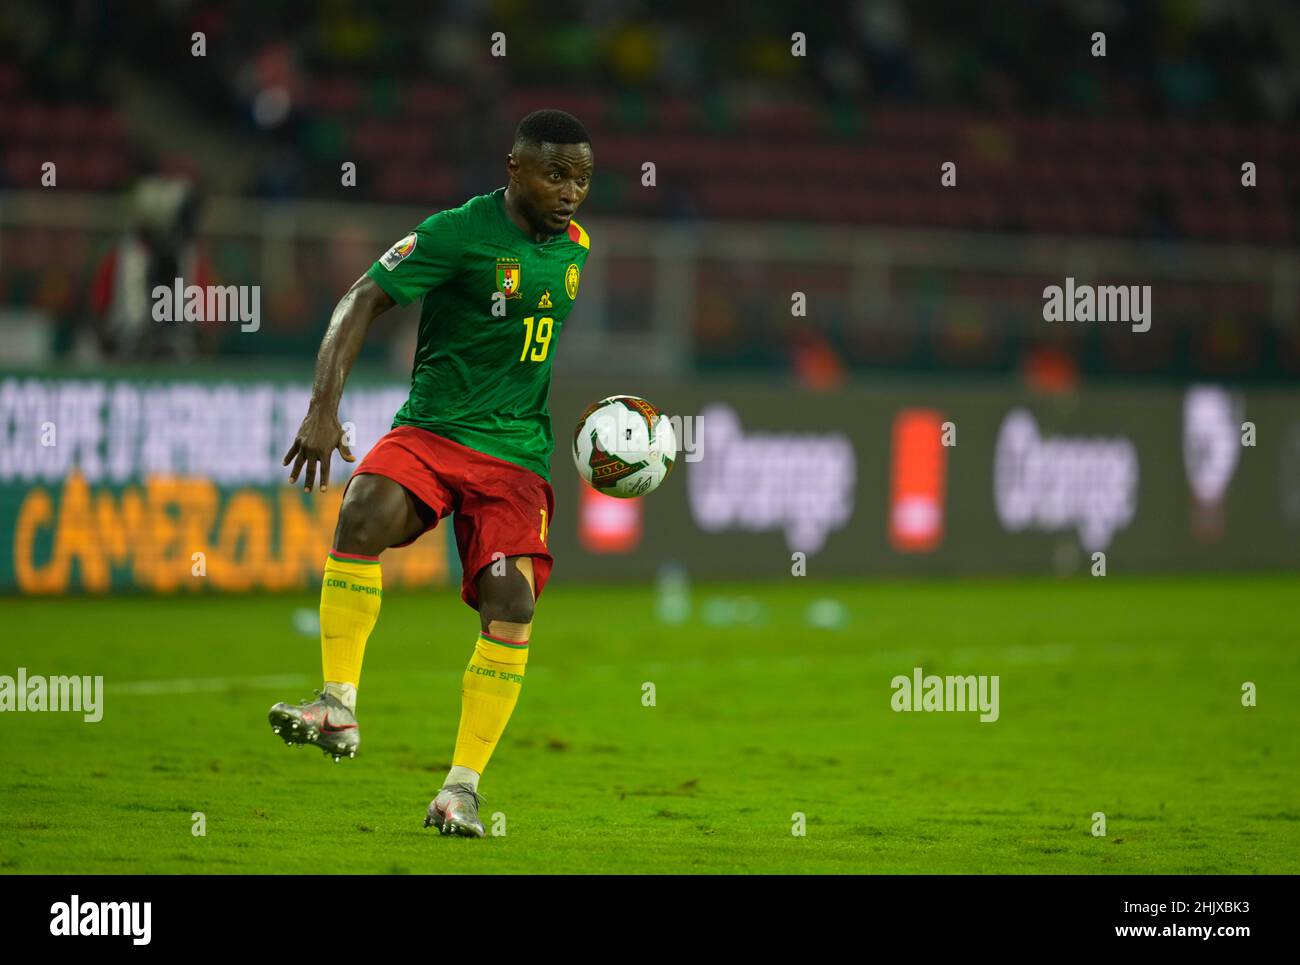 Yaounde, Cameroon, January, 24, 2022: Collins Fai of Cameroon during Cameroun versus Comoros - Africa Cup of Nations at Olembe stadium. Kim Price/CSM. Stock Photo